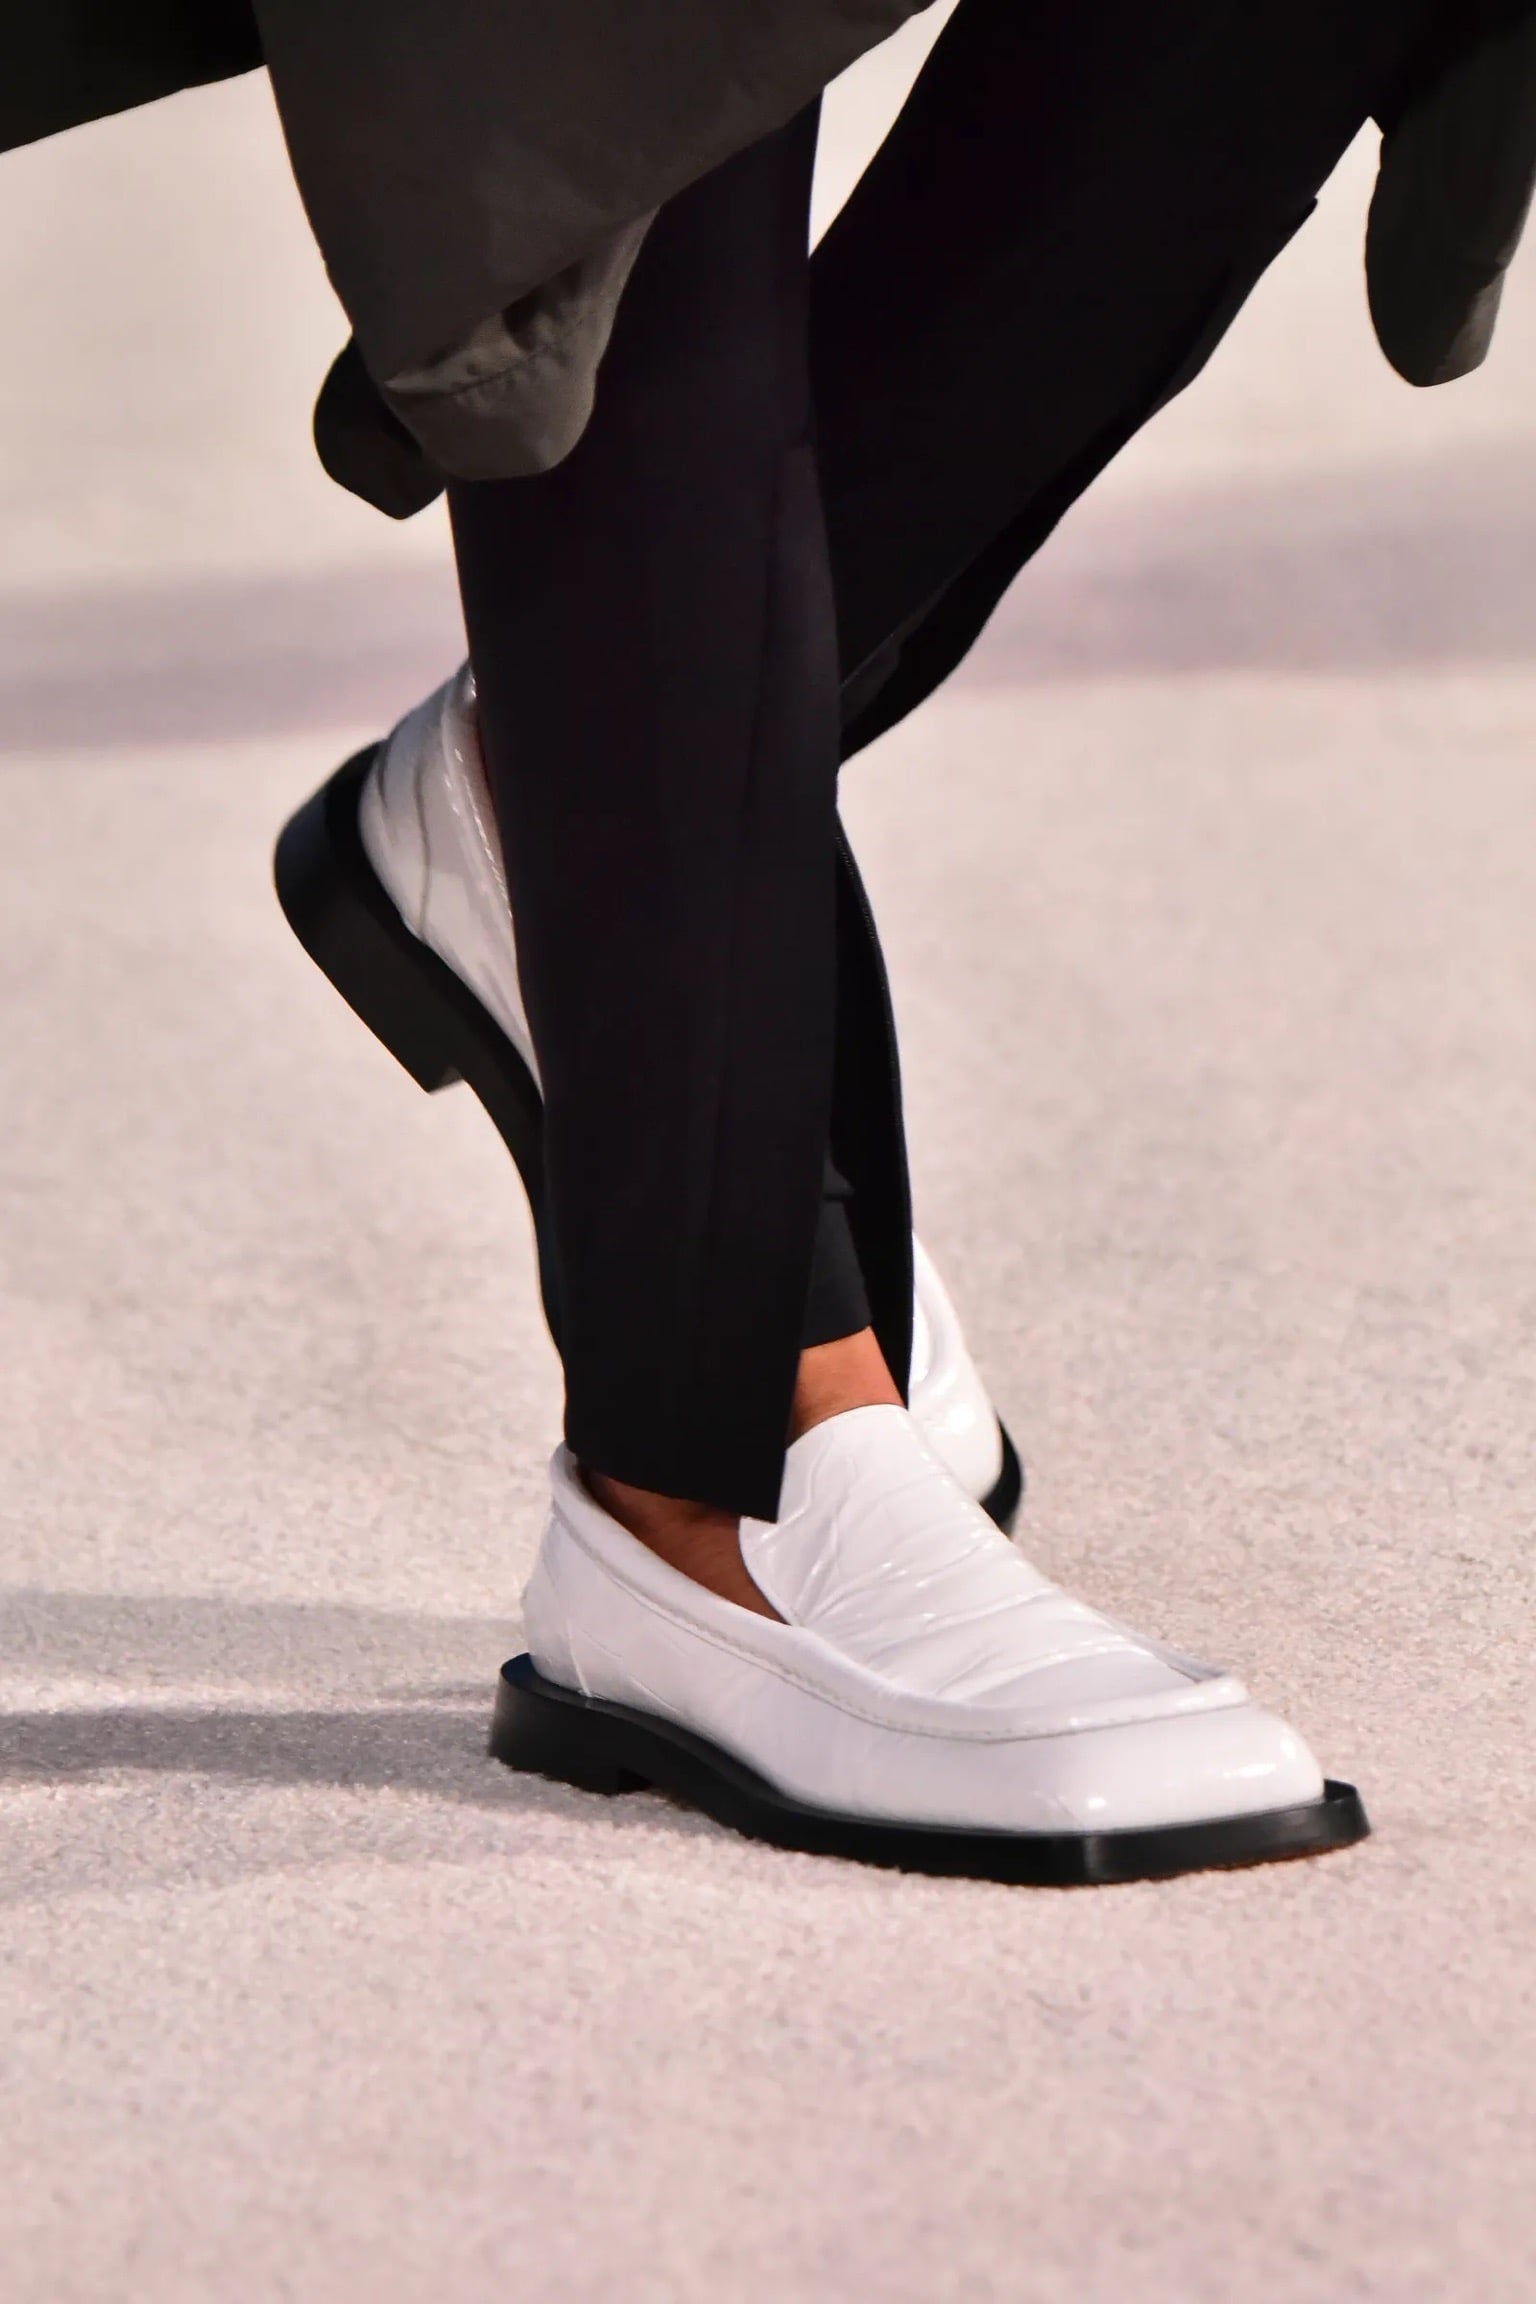 Spring 2022 Shoe Trends Straight From the Runways